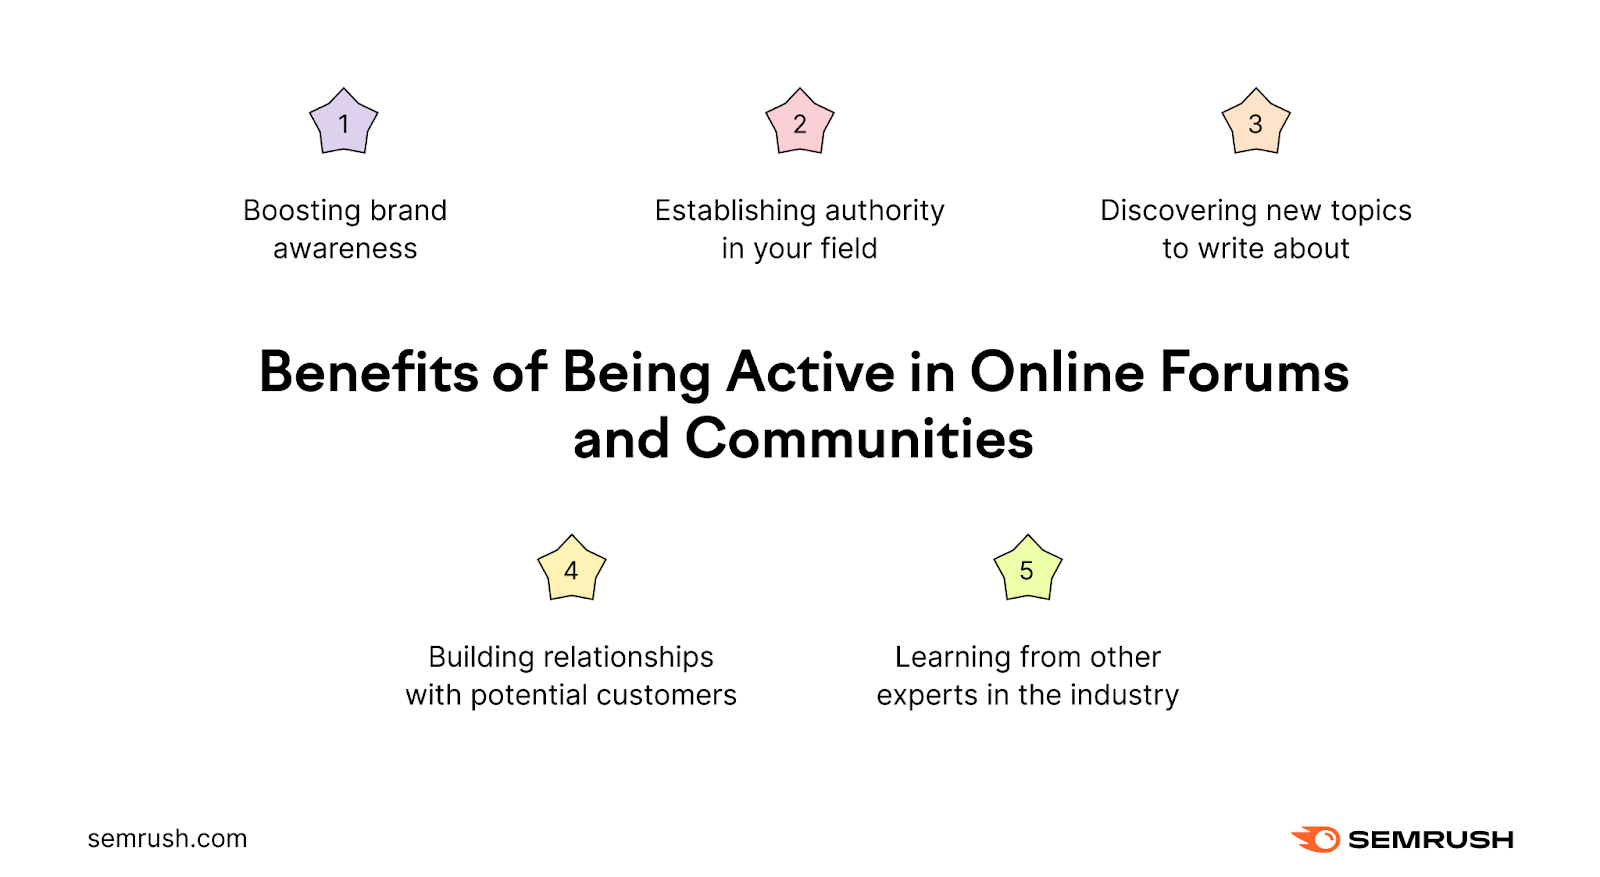 Benefits of being progressive  successful  online forums and communities are boosting marque  awareness, establishing authorization  successful  your field, discovering caller   topics to constitute   about, gathering  relationships with imaginable   customers, learning from different   experts successful  the industry.